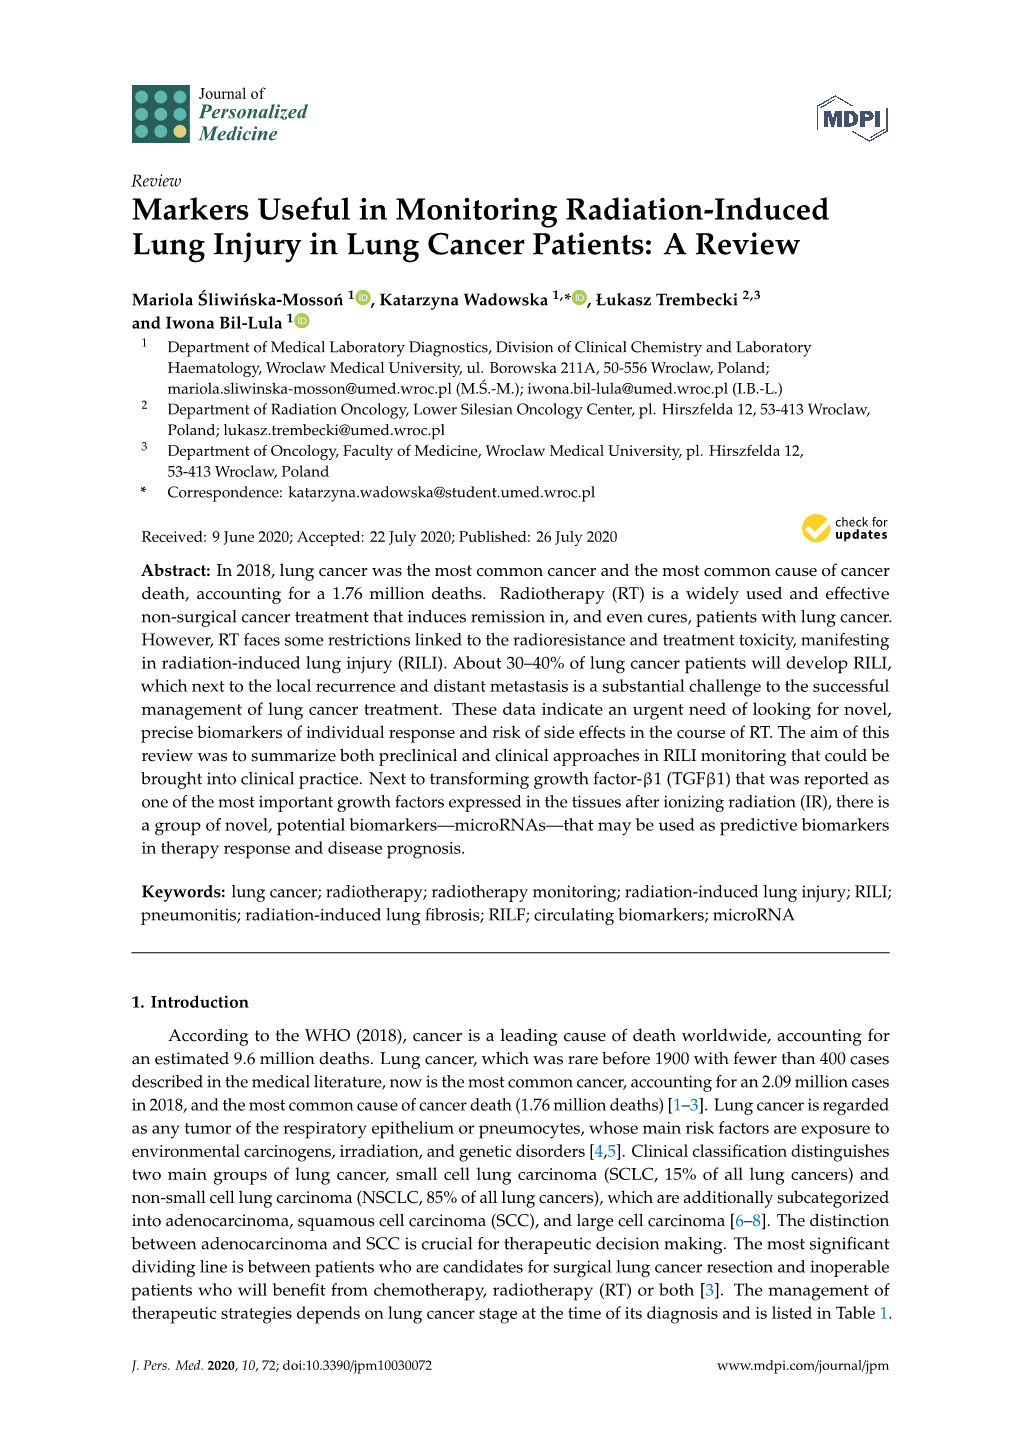 Markers Useful in Monitoring Radiation-Induced Lung Injury in Lung Cancer Patients: a Review